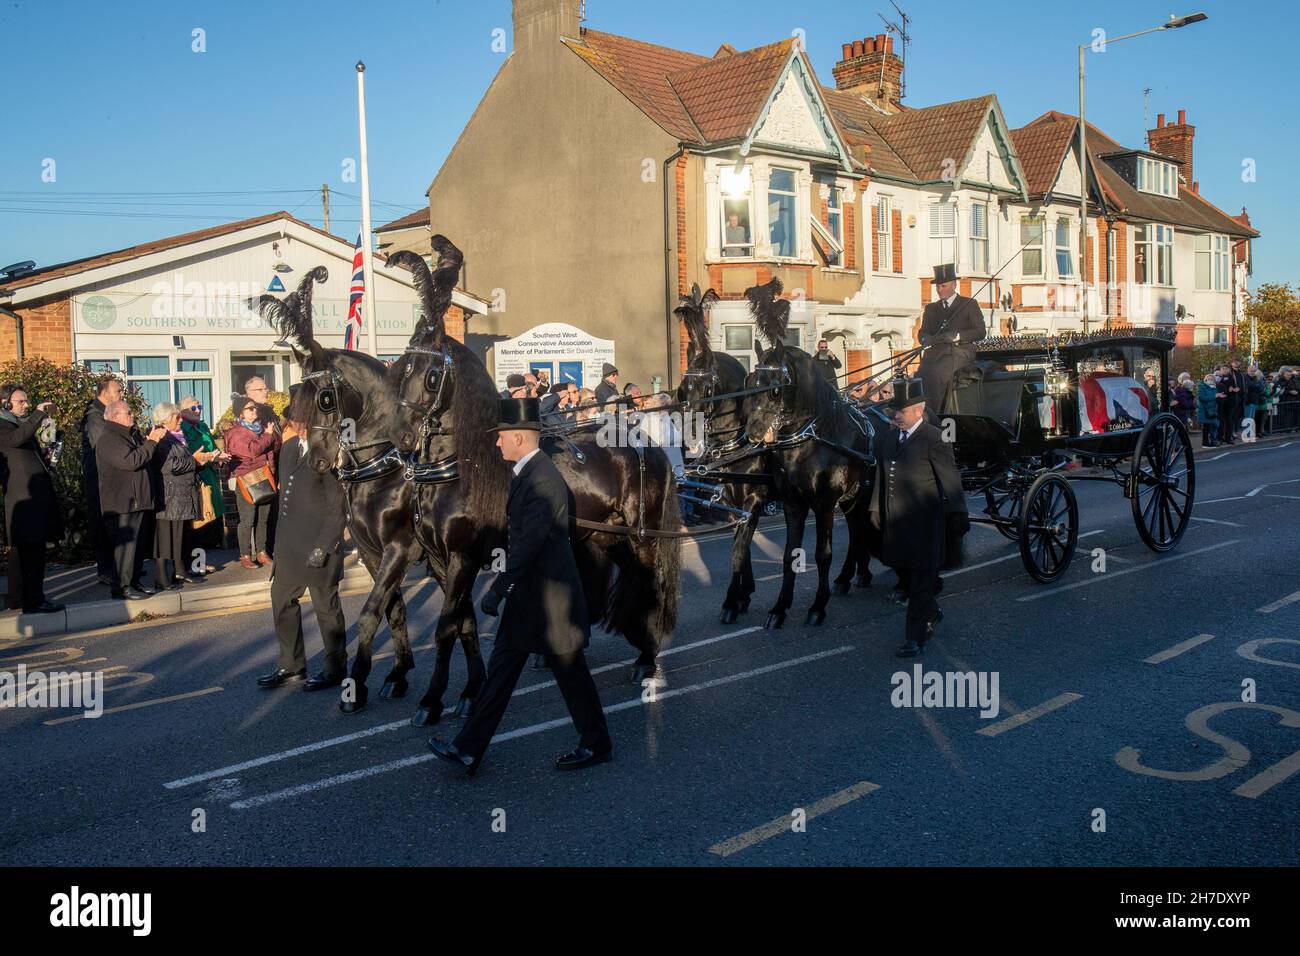 SOUTHEND ON SEA, GBR. NOV 22ND. Members of the public align the streets outside Southend West Conservative Association's Iveagh Hall to pay their respects as a horse-drawn hearse carrying the coffin of murdered Southend West MP Sir David Amess on Monday 22nd November 2021. (Credit: Lucy North | MI News) Credit: MI News & Sport /Alamy Live News Stock Photo